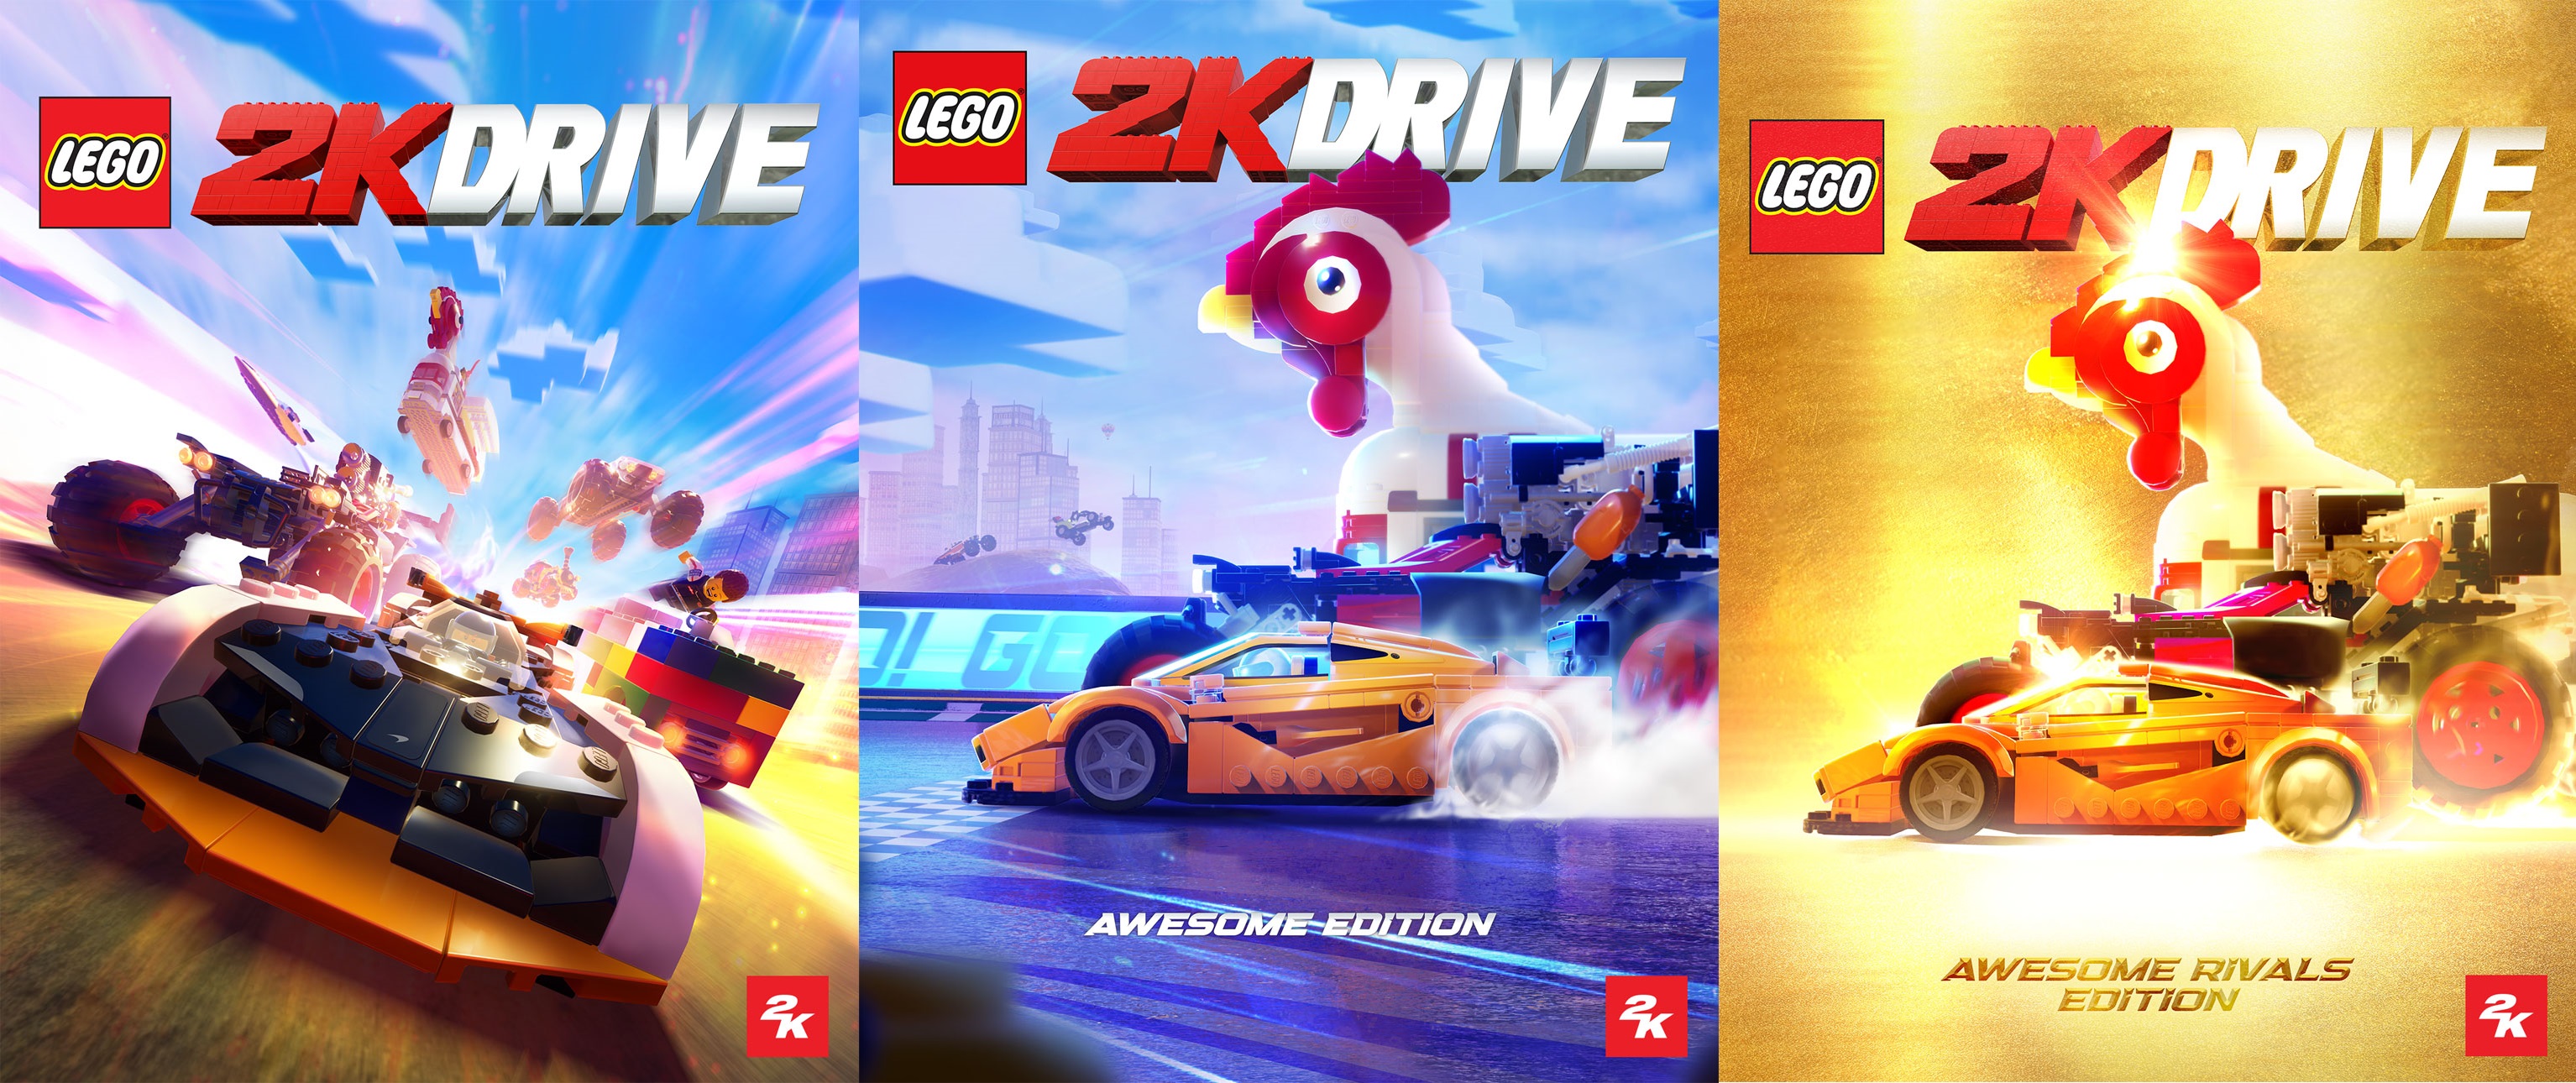 LEGO 2K Drive Officially Announced Fan Brick The 